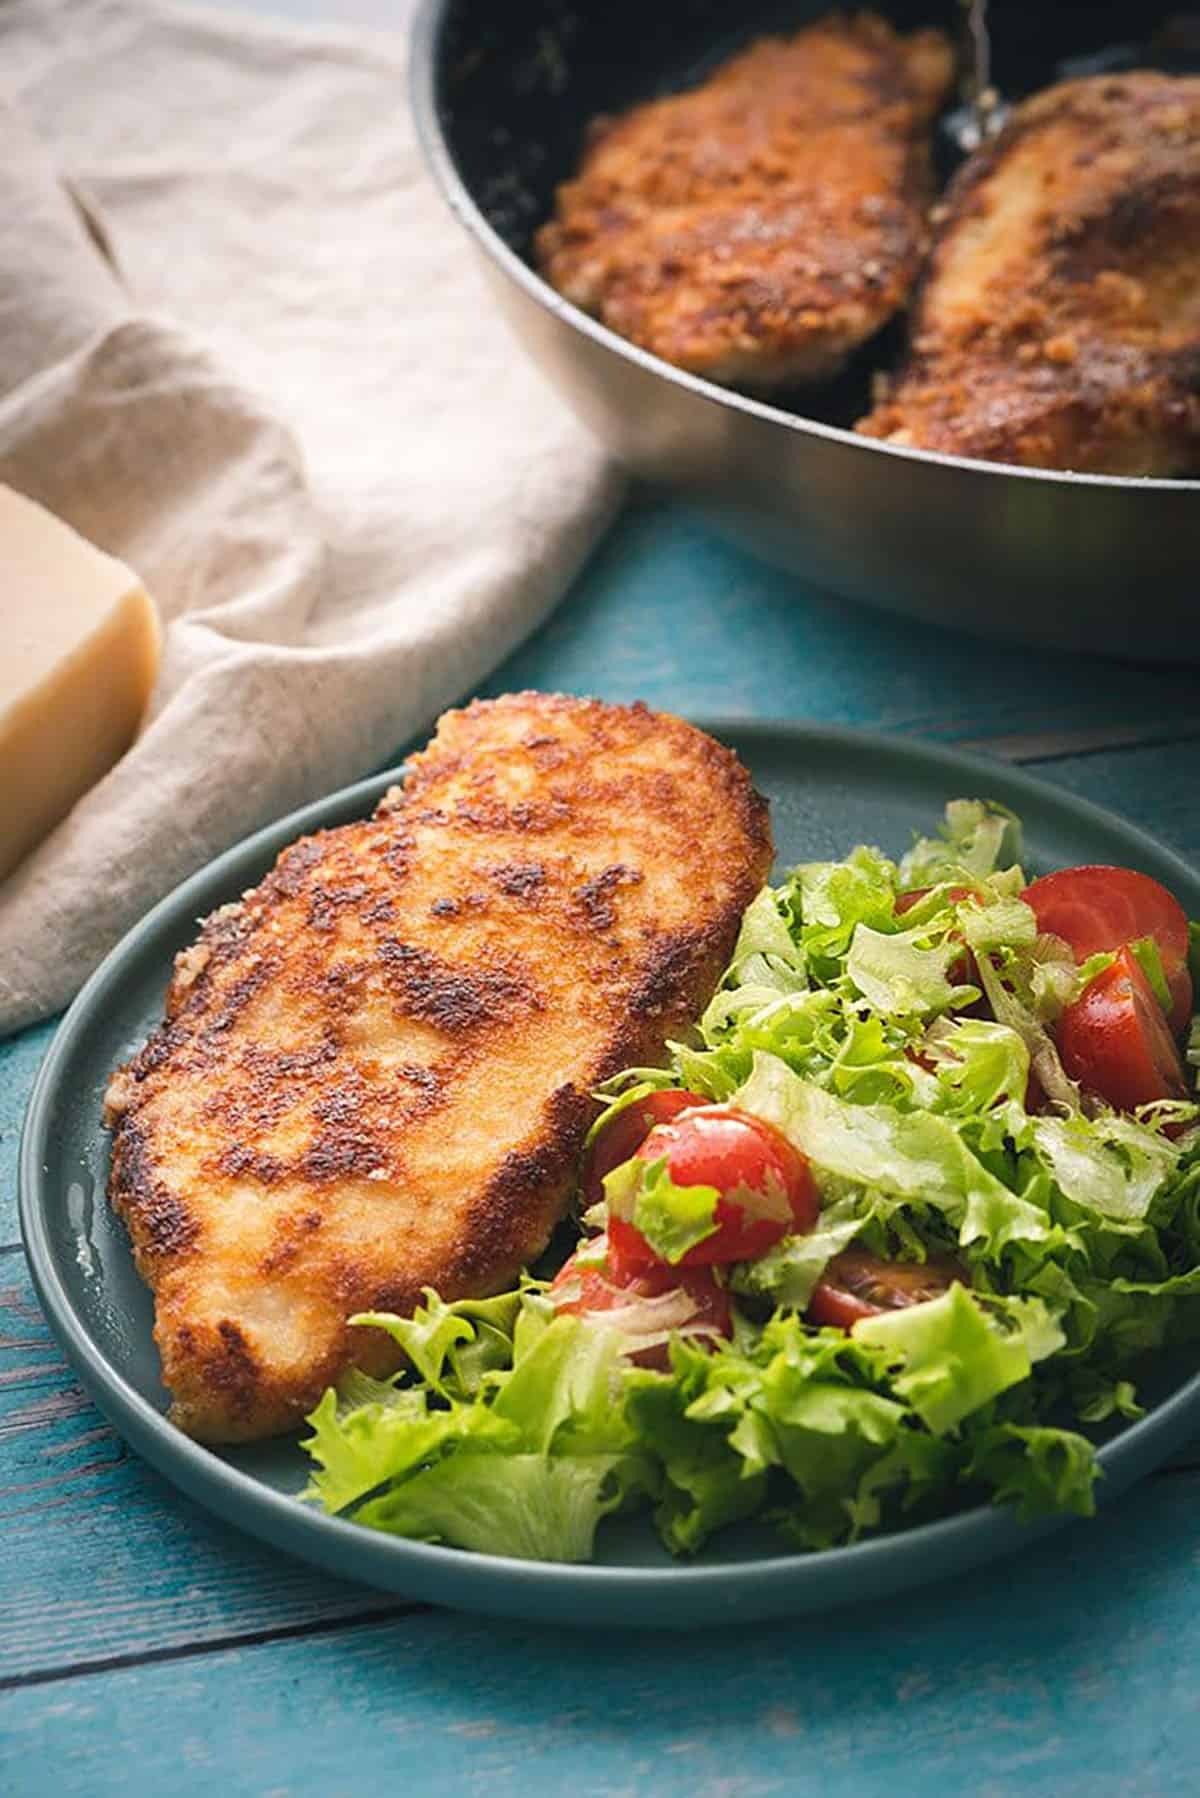 Parmesan crusted chicken cutlets on a blue plate with a garden salad on a blue background with a white napkin in the left corner.